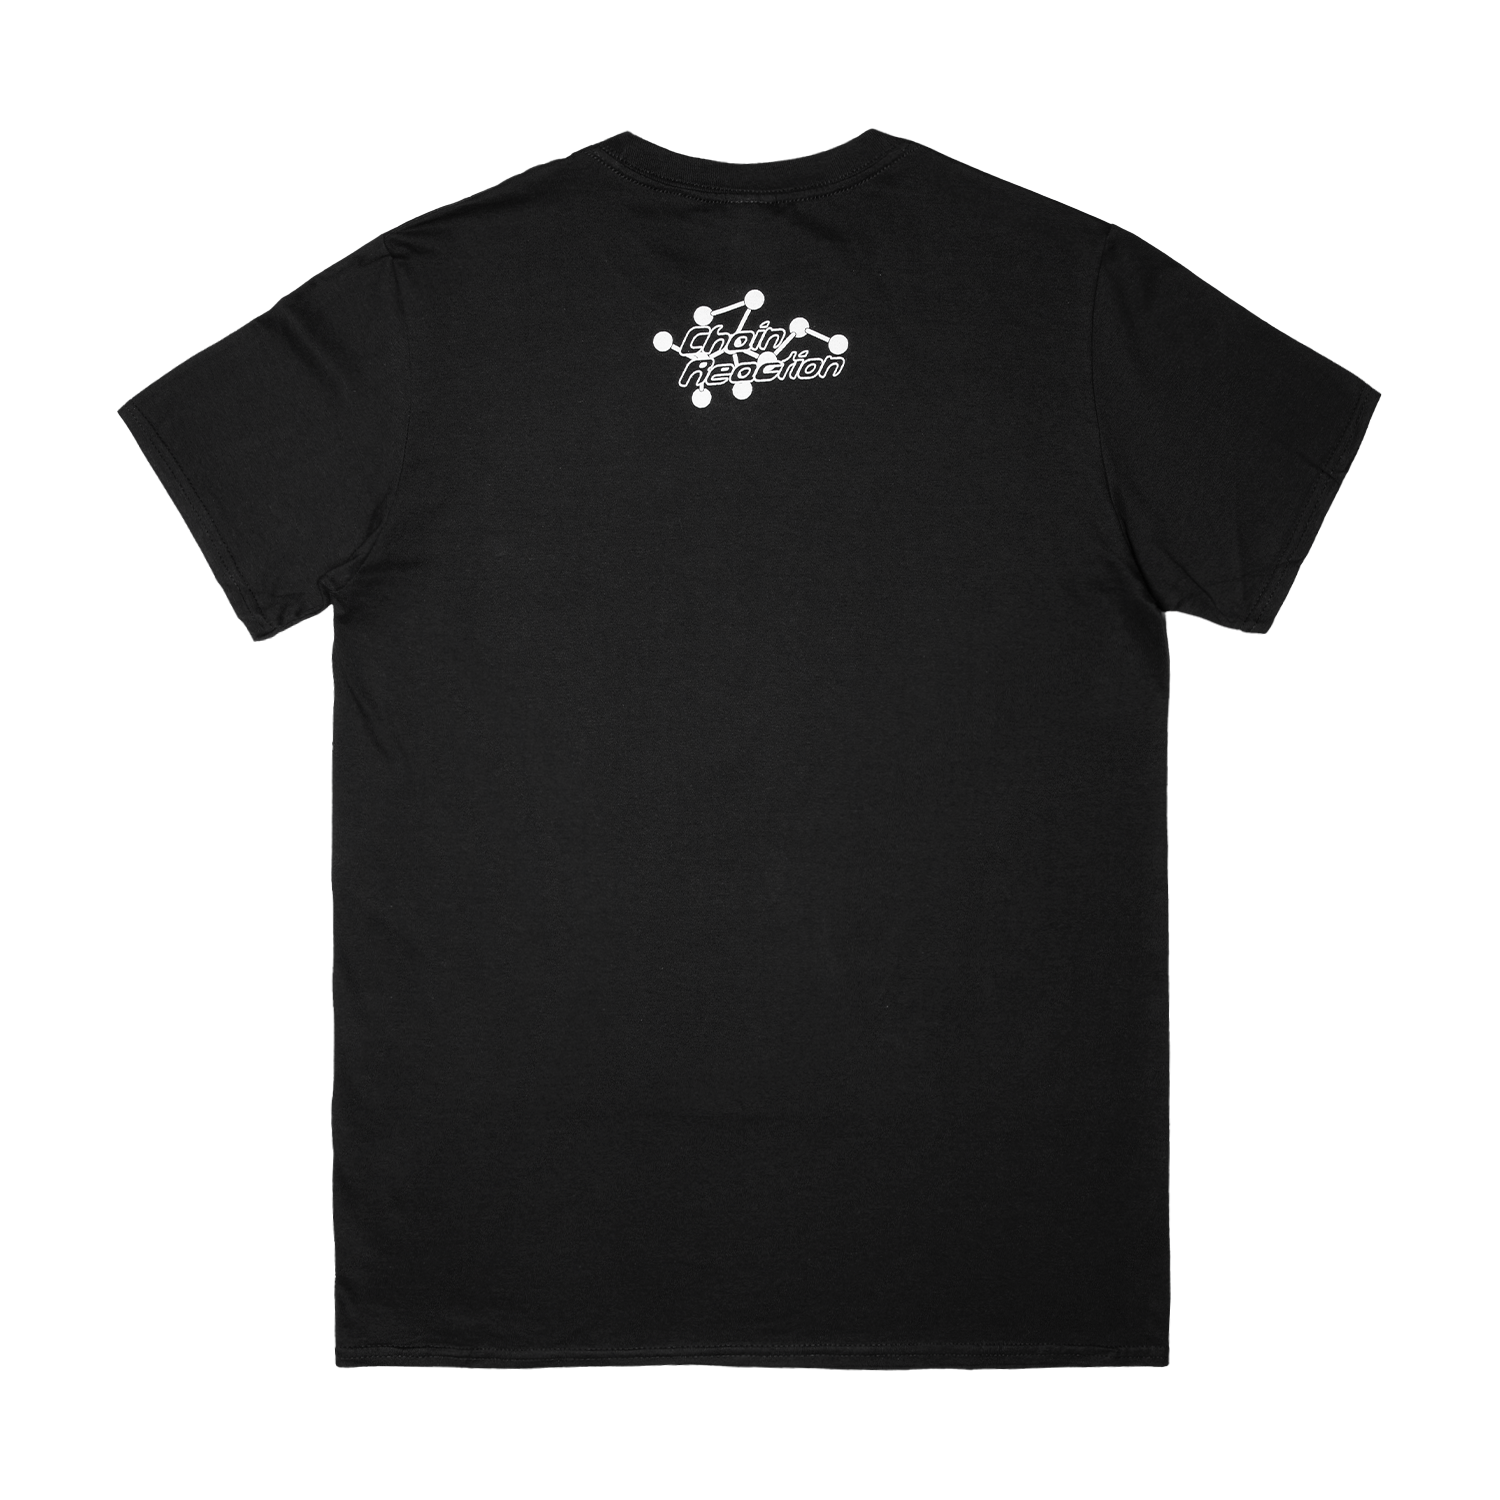 Thrice x Chain Reaction Black Tee – Thrice | Official Merchandise Store